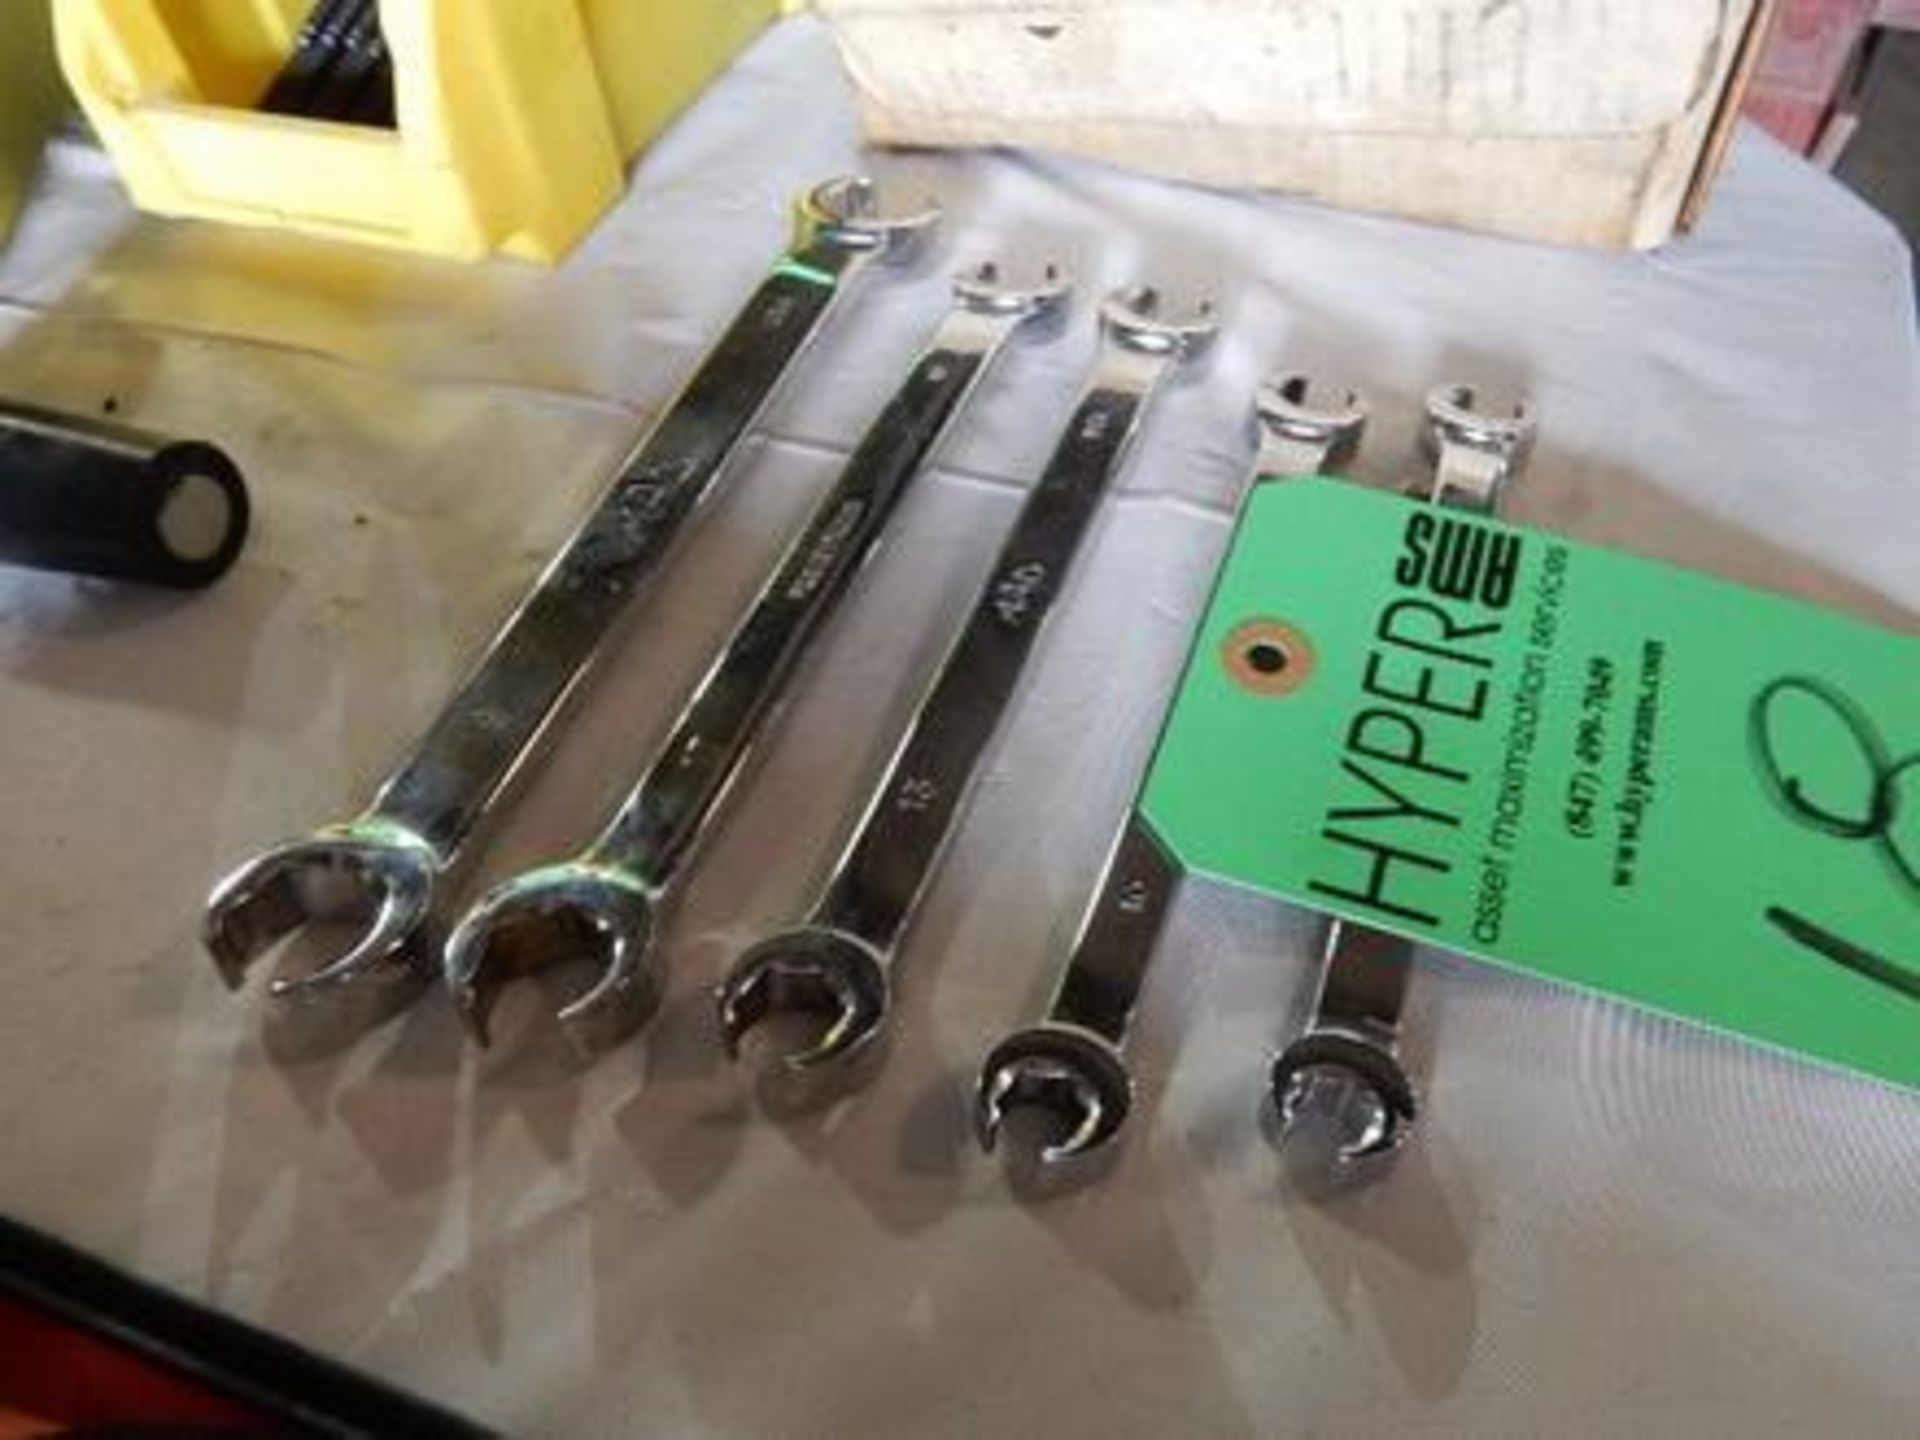 Metric Double End Flare Nut Wrenches - 5PT. To include Sizes: 21/17, 17/15, 14/13, 12/10 and 11/06 - Image 2 of 2